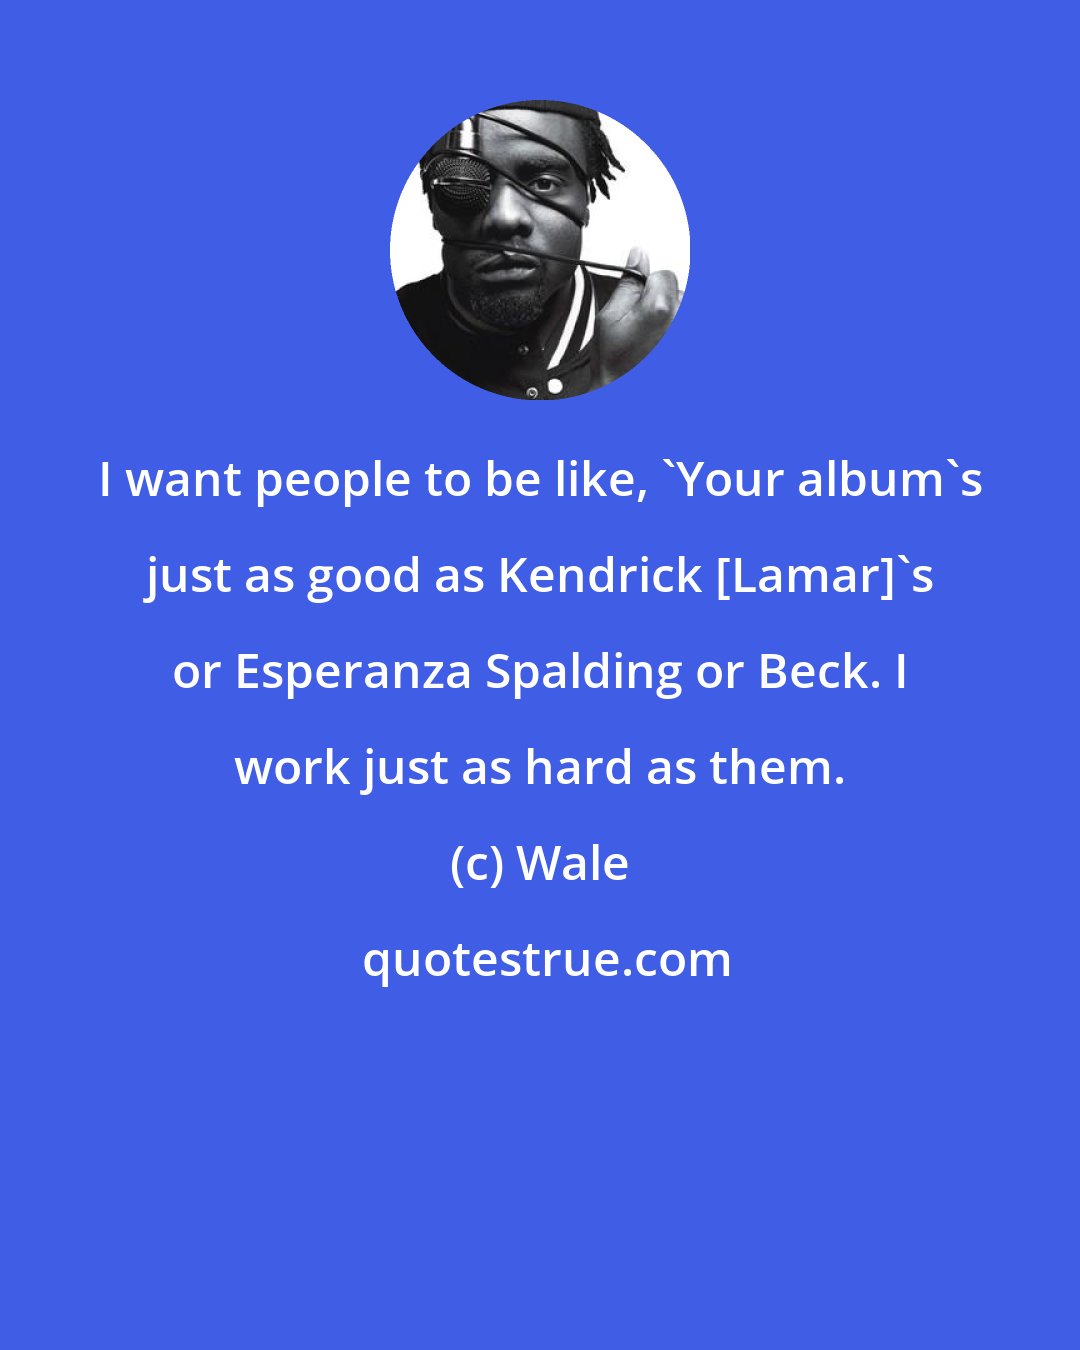 Wale: I want people to be like, 'Your album's just as good as Kendrick [Lamar]'s or Esperanza Spalding or Beck. I work just as hard as them.